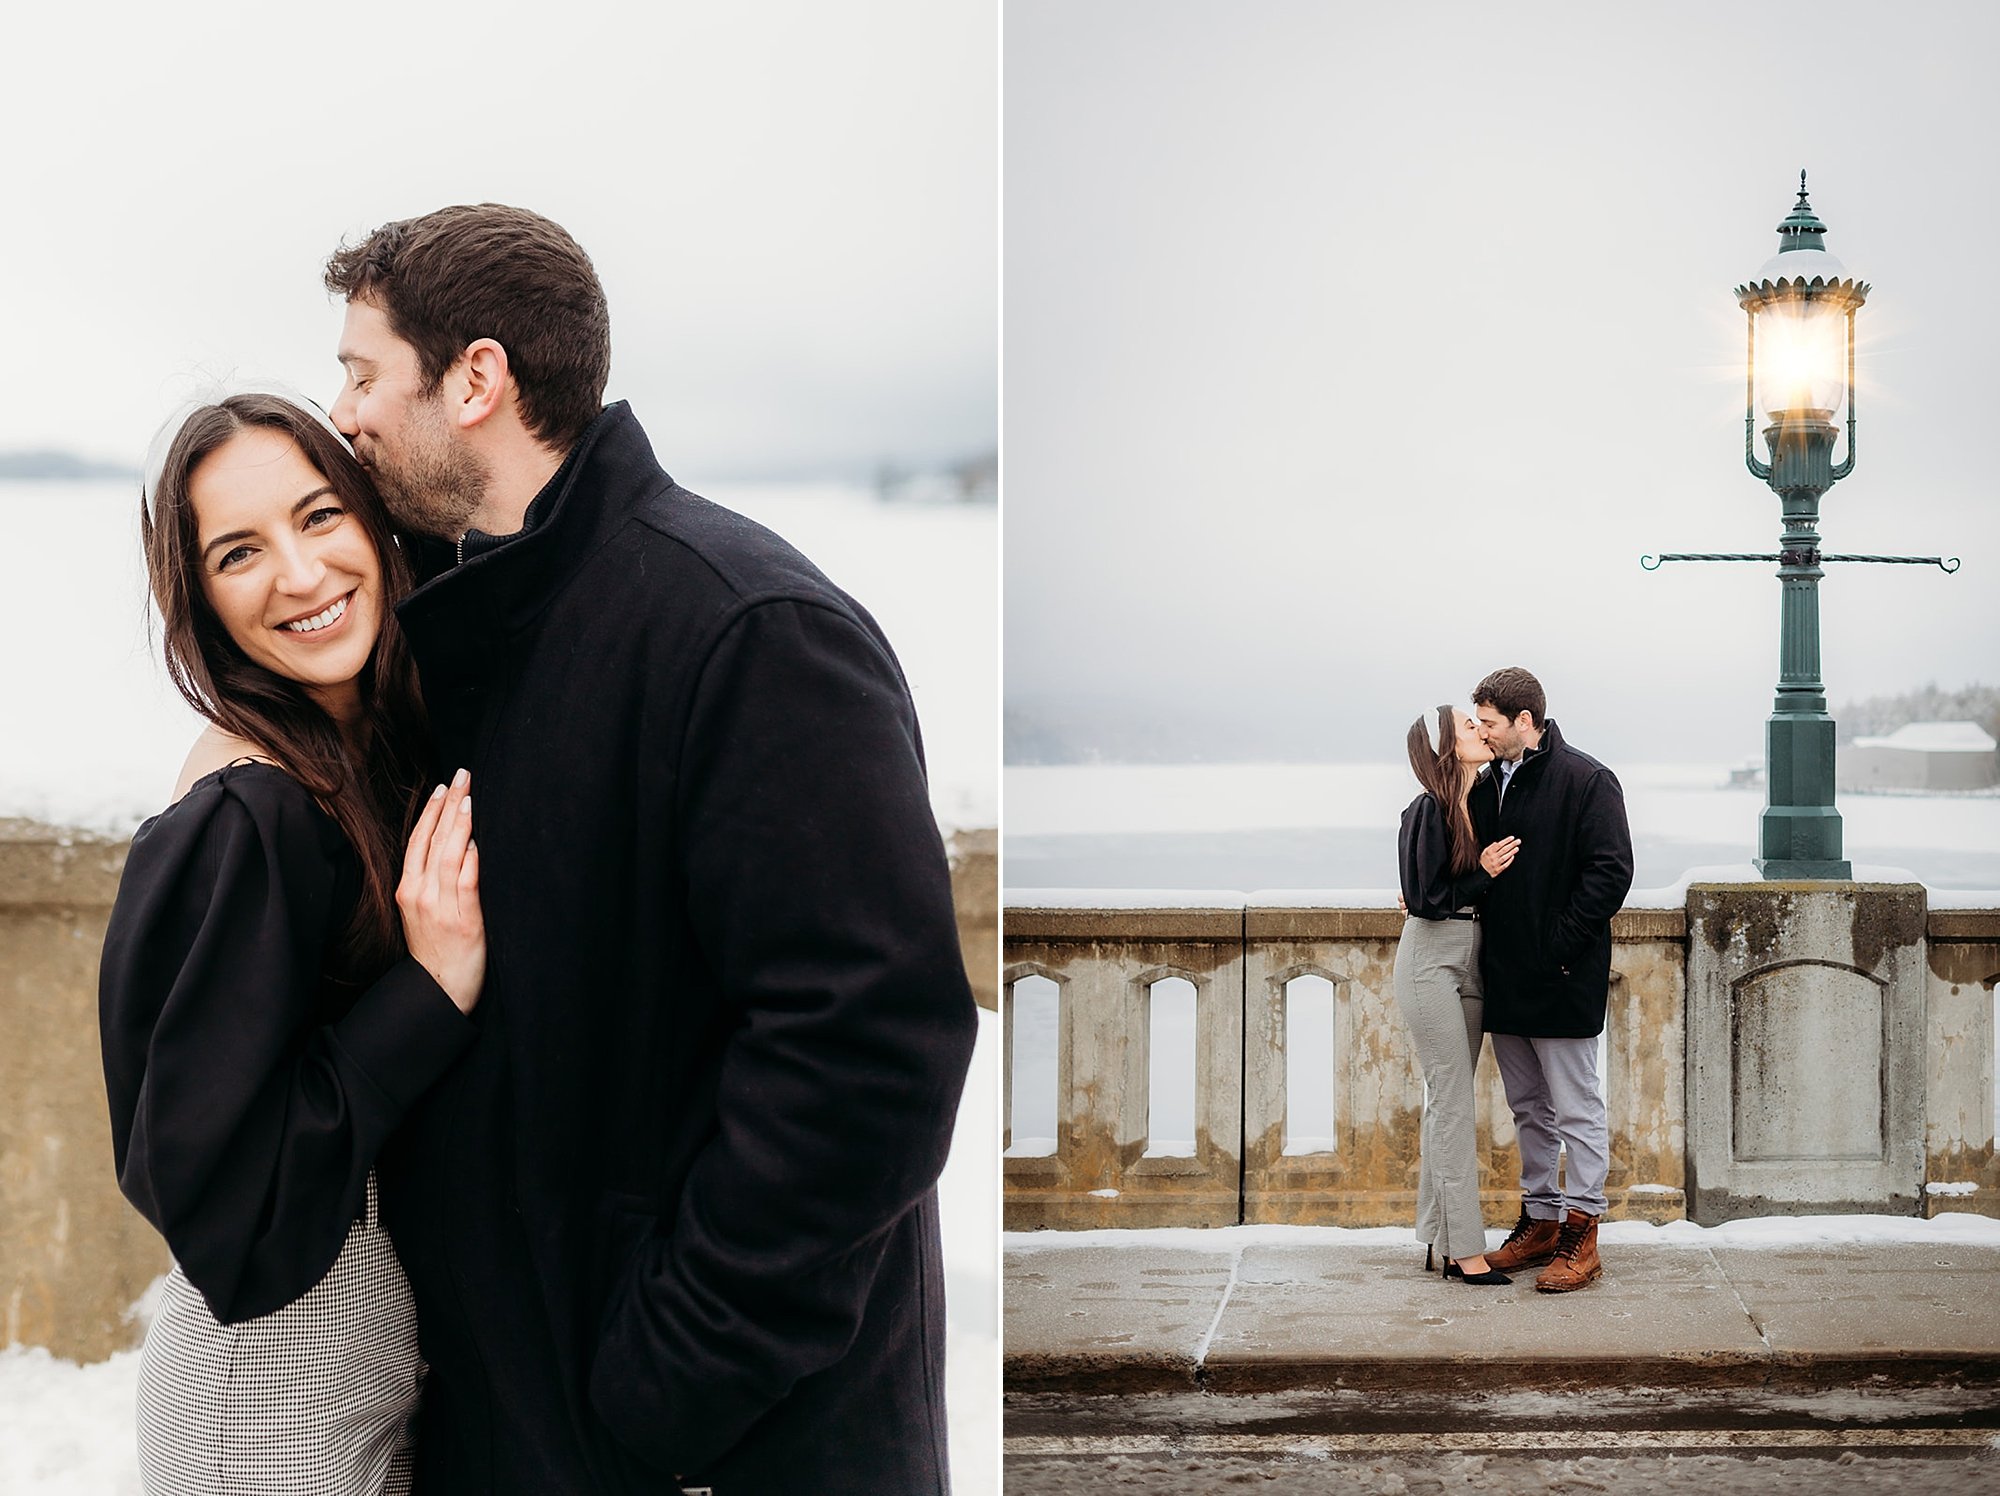 man leans to kiss woman's forehead during portraits by lamppost 